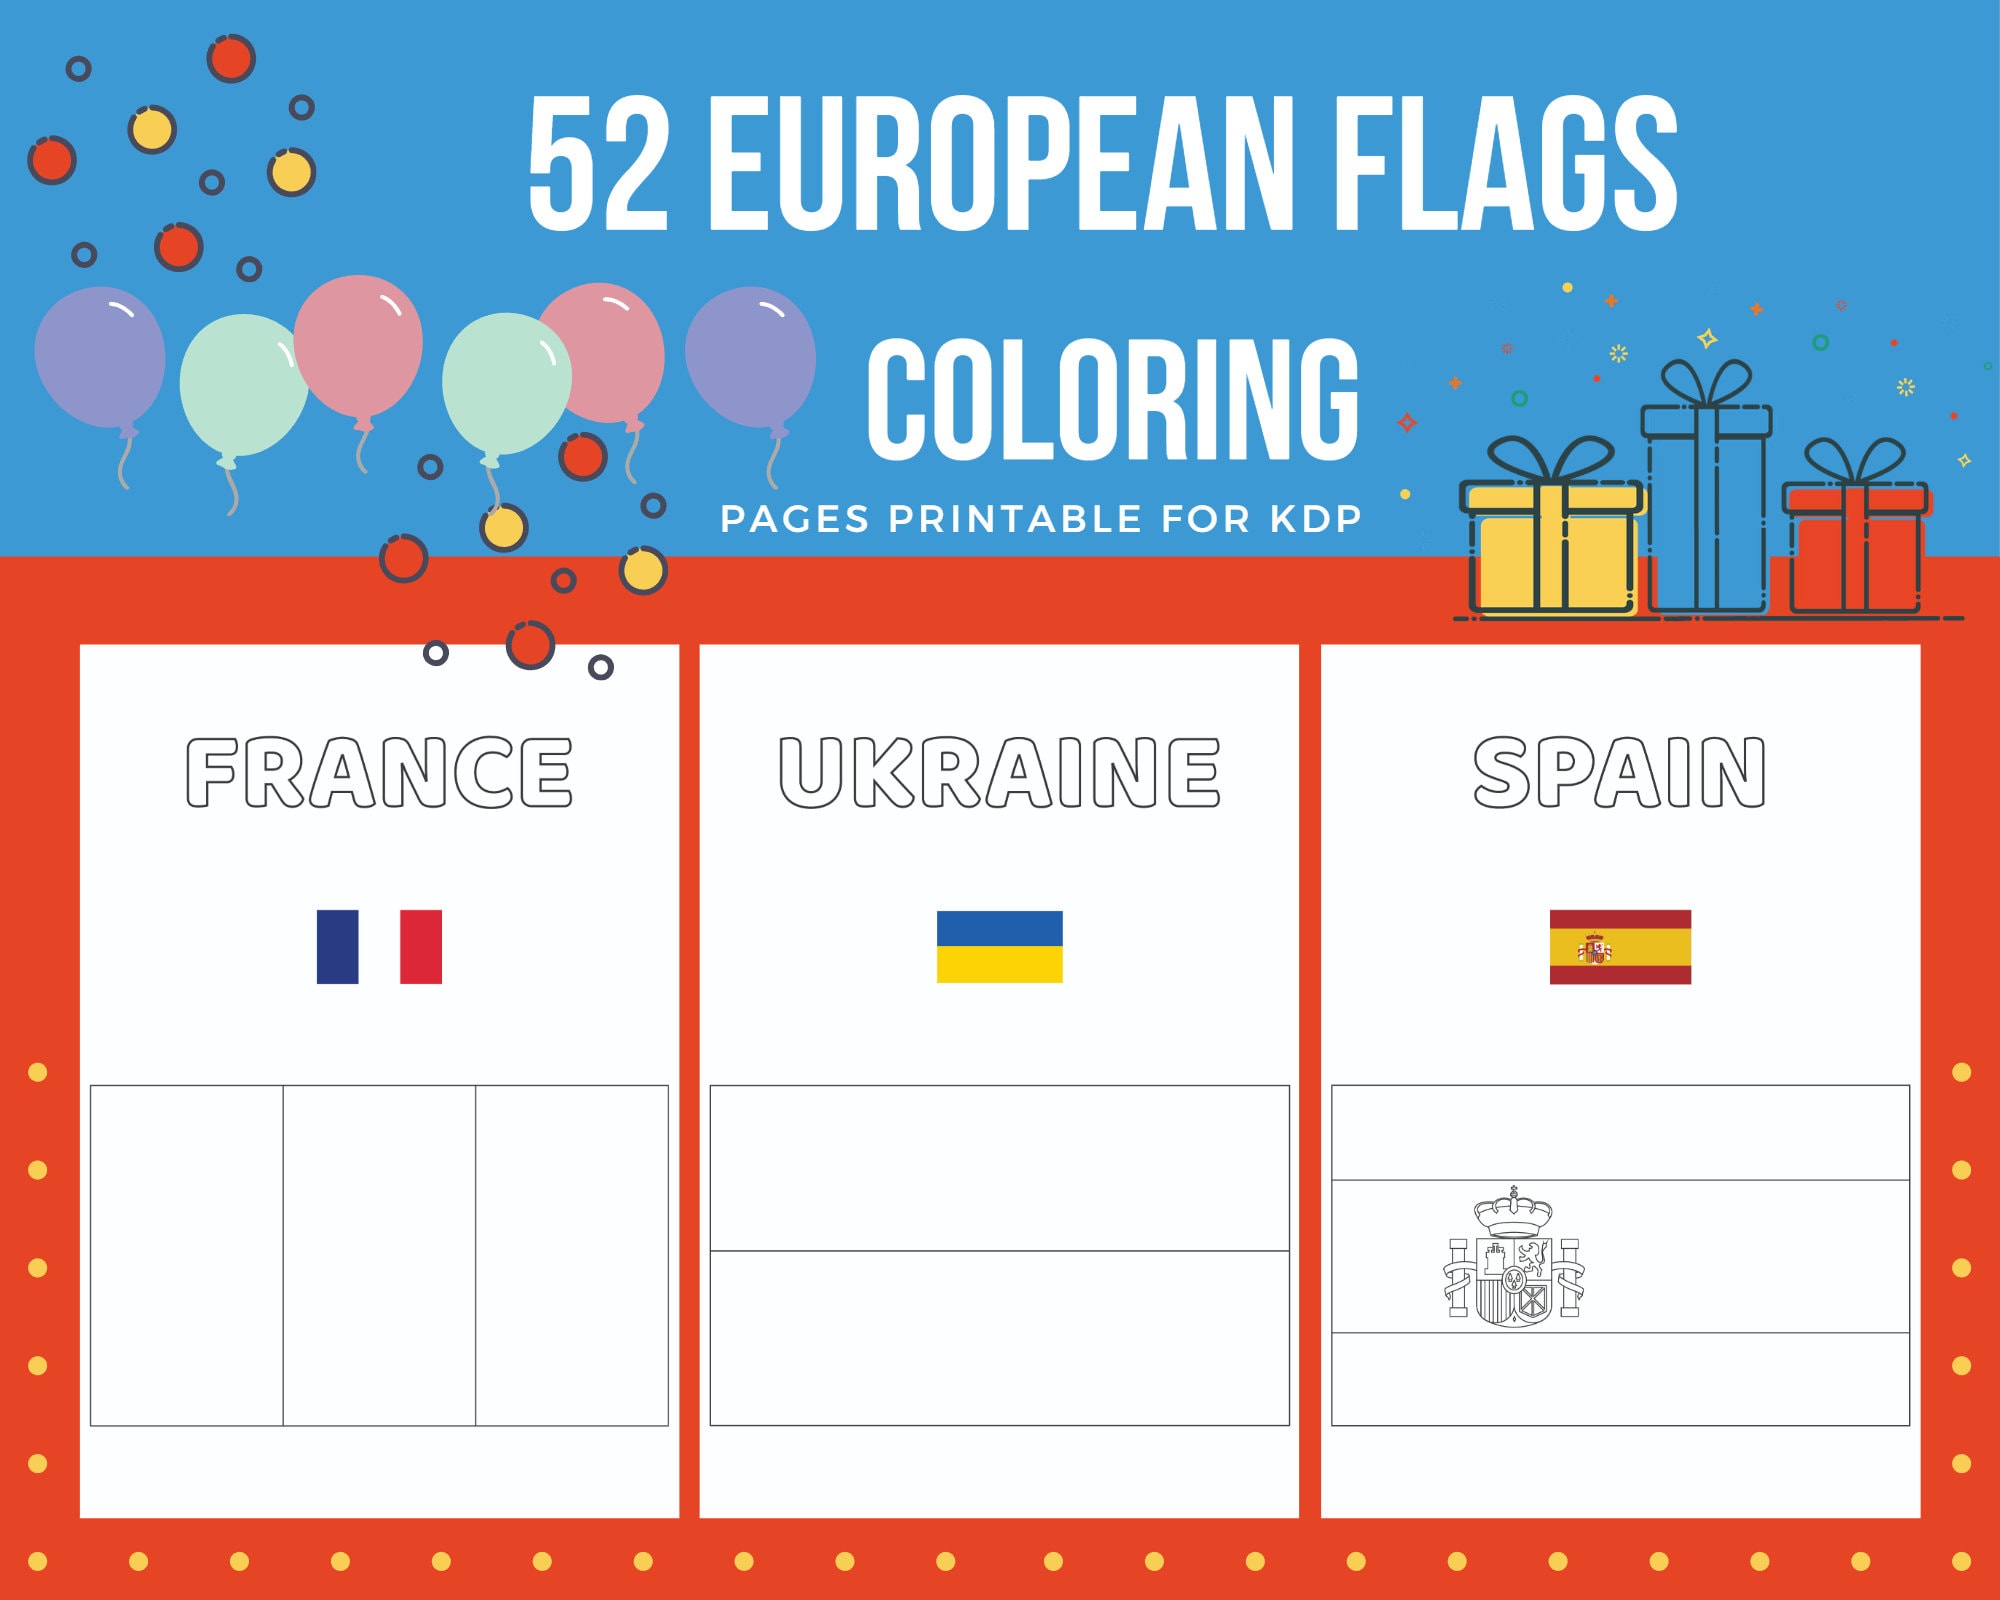 European flags coloring pages printable for kids pdf file us letter instant download kdp coloring book for kids